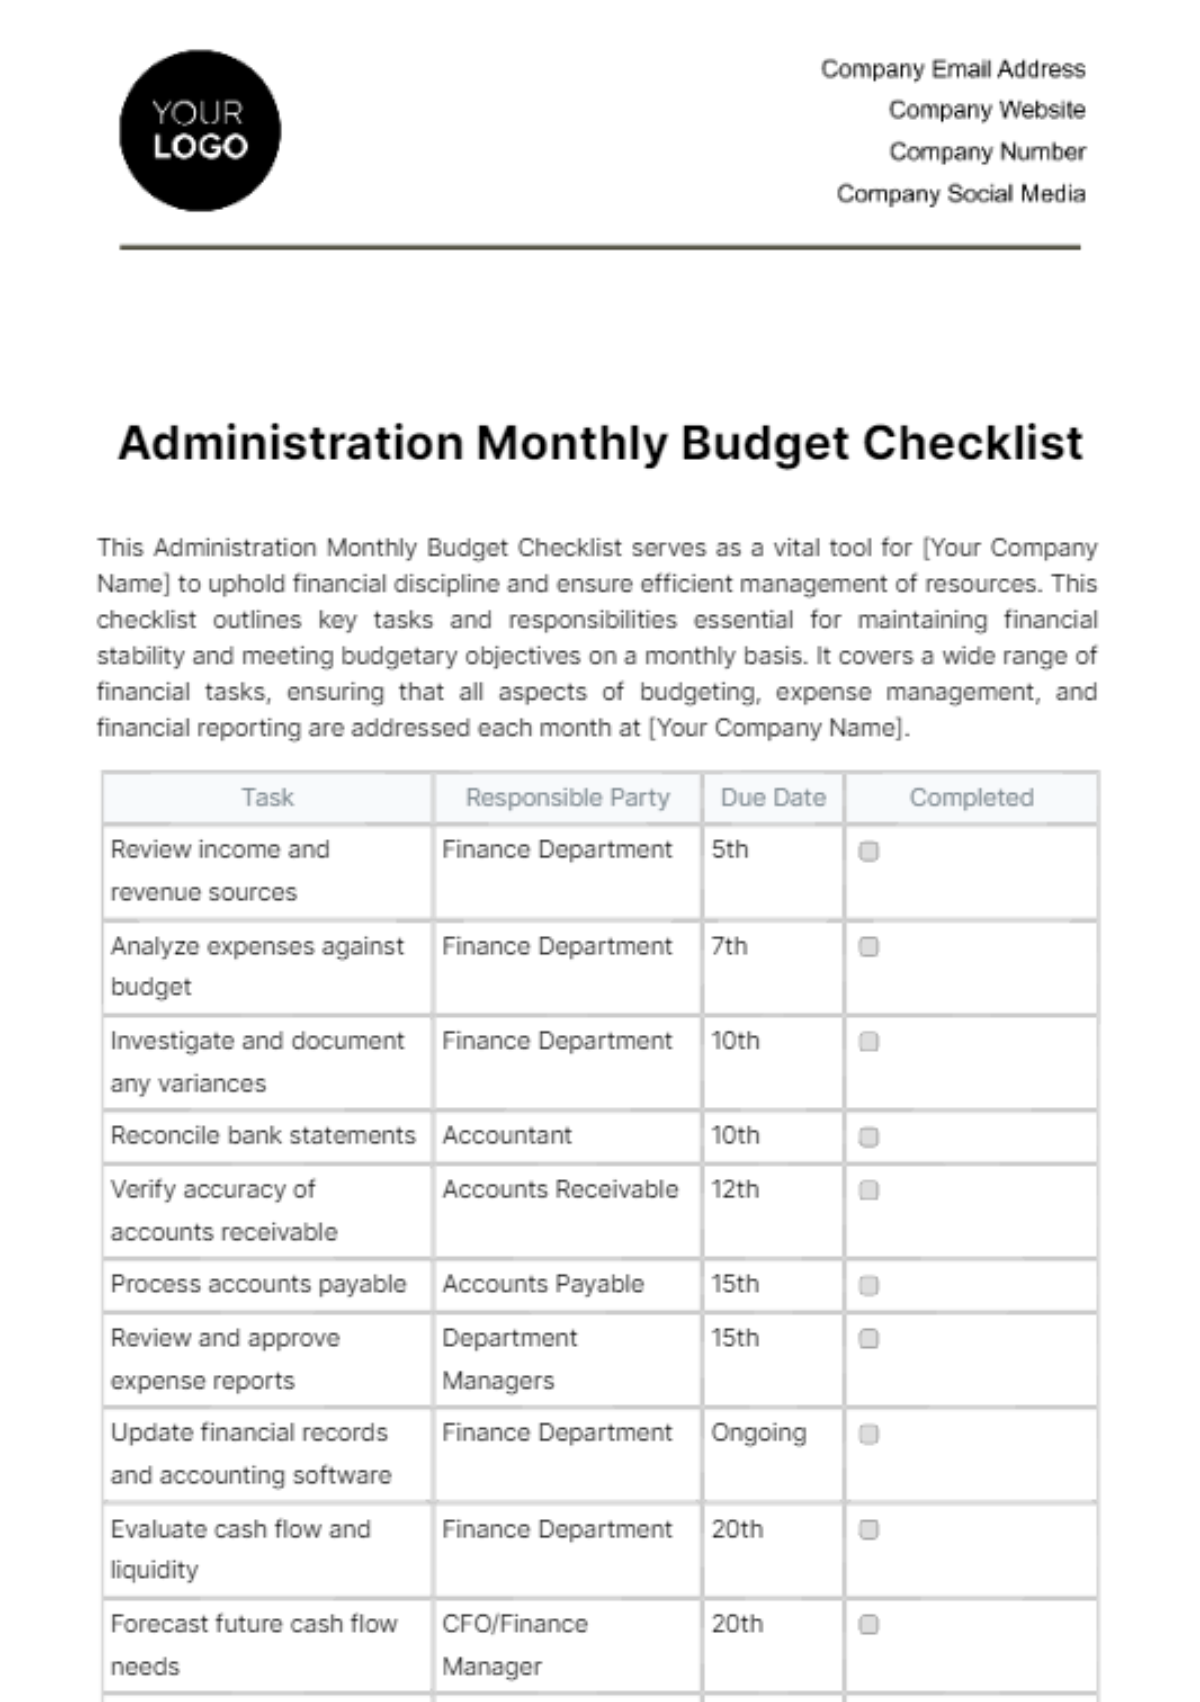 Free Administration Monthly Budget Checklist Template